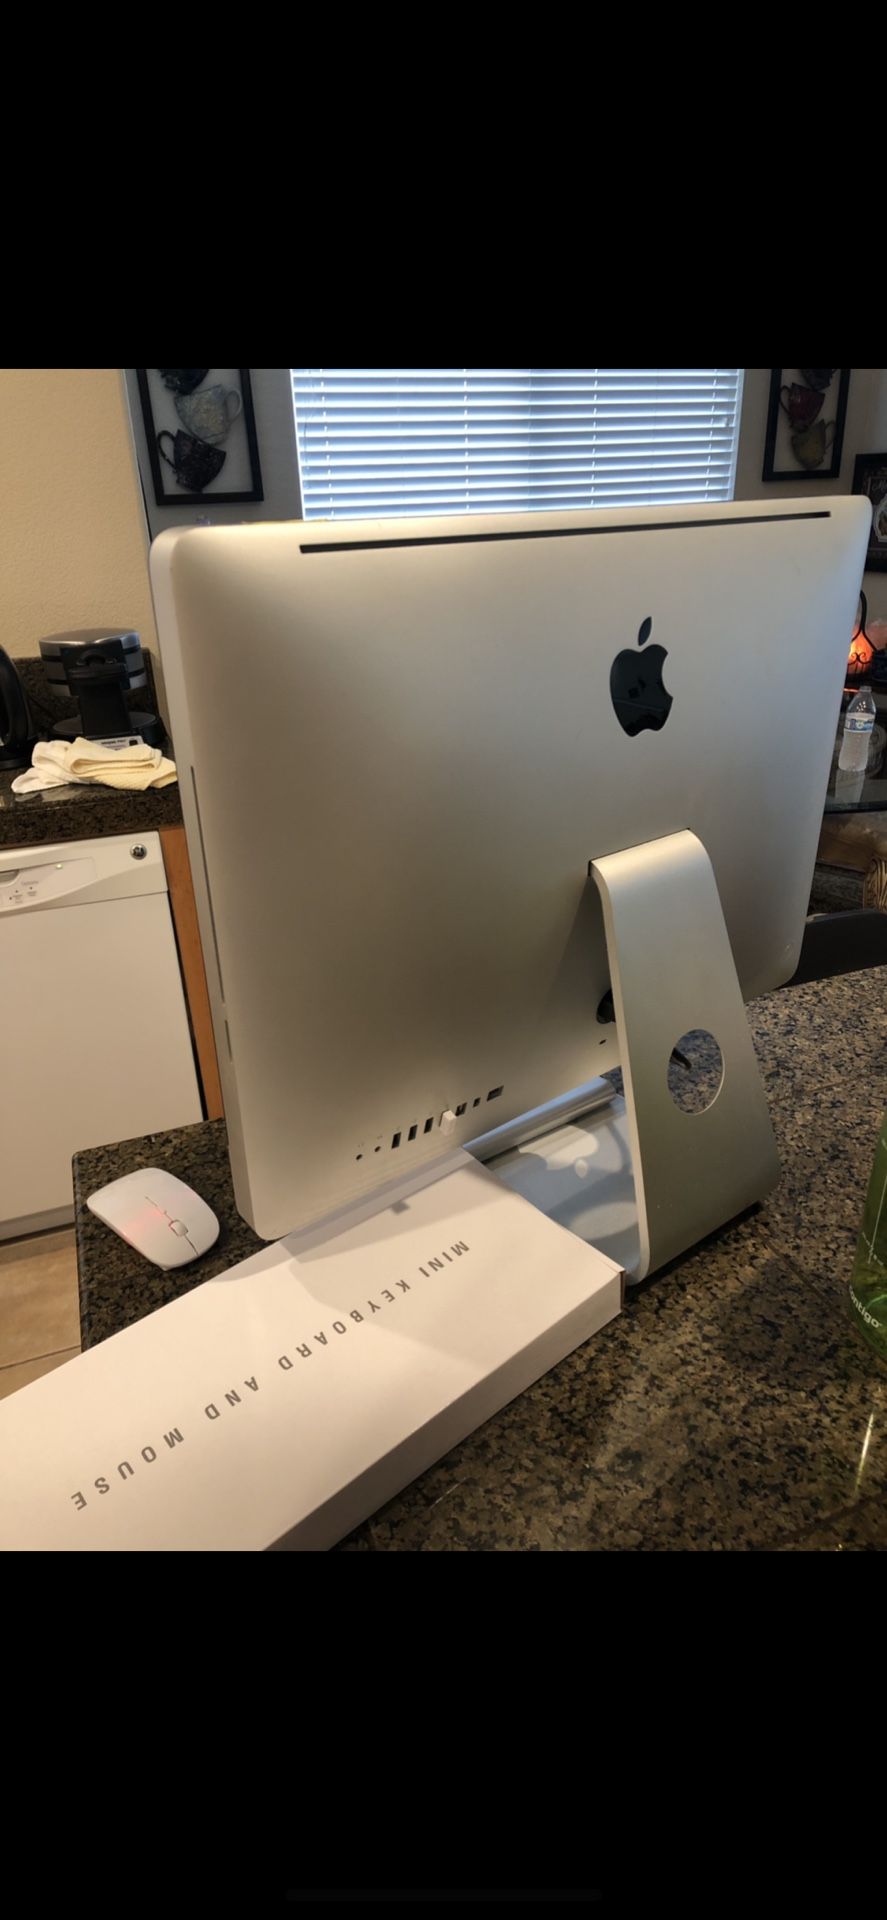 1TB hard drive 3.06ghz Apple iMac with (brand new wireless mouse and keyboard in box ) Large screen